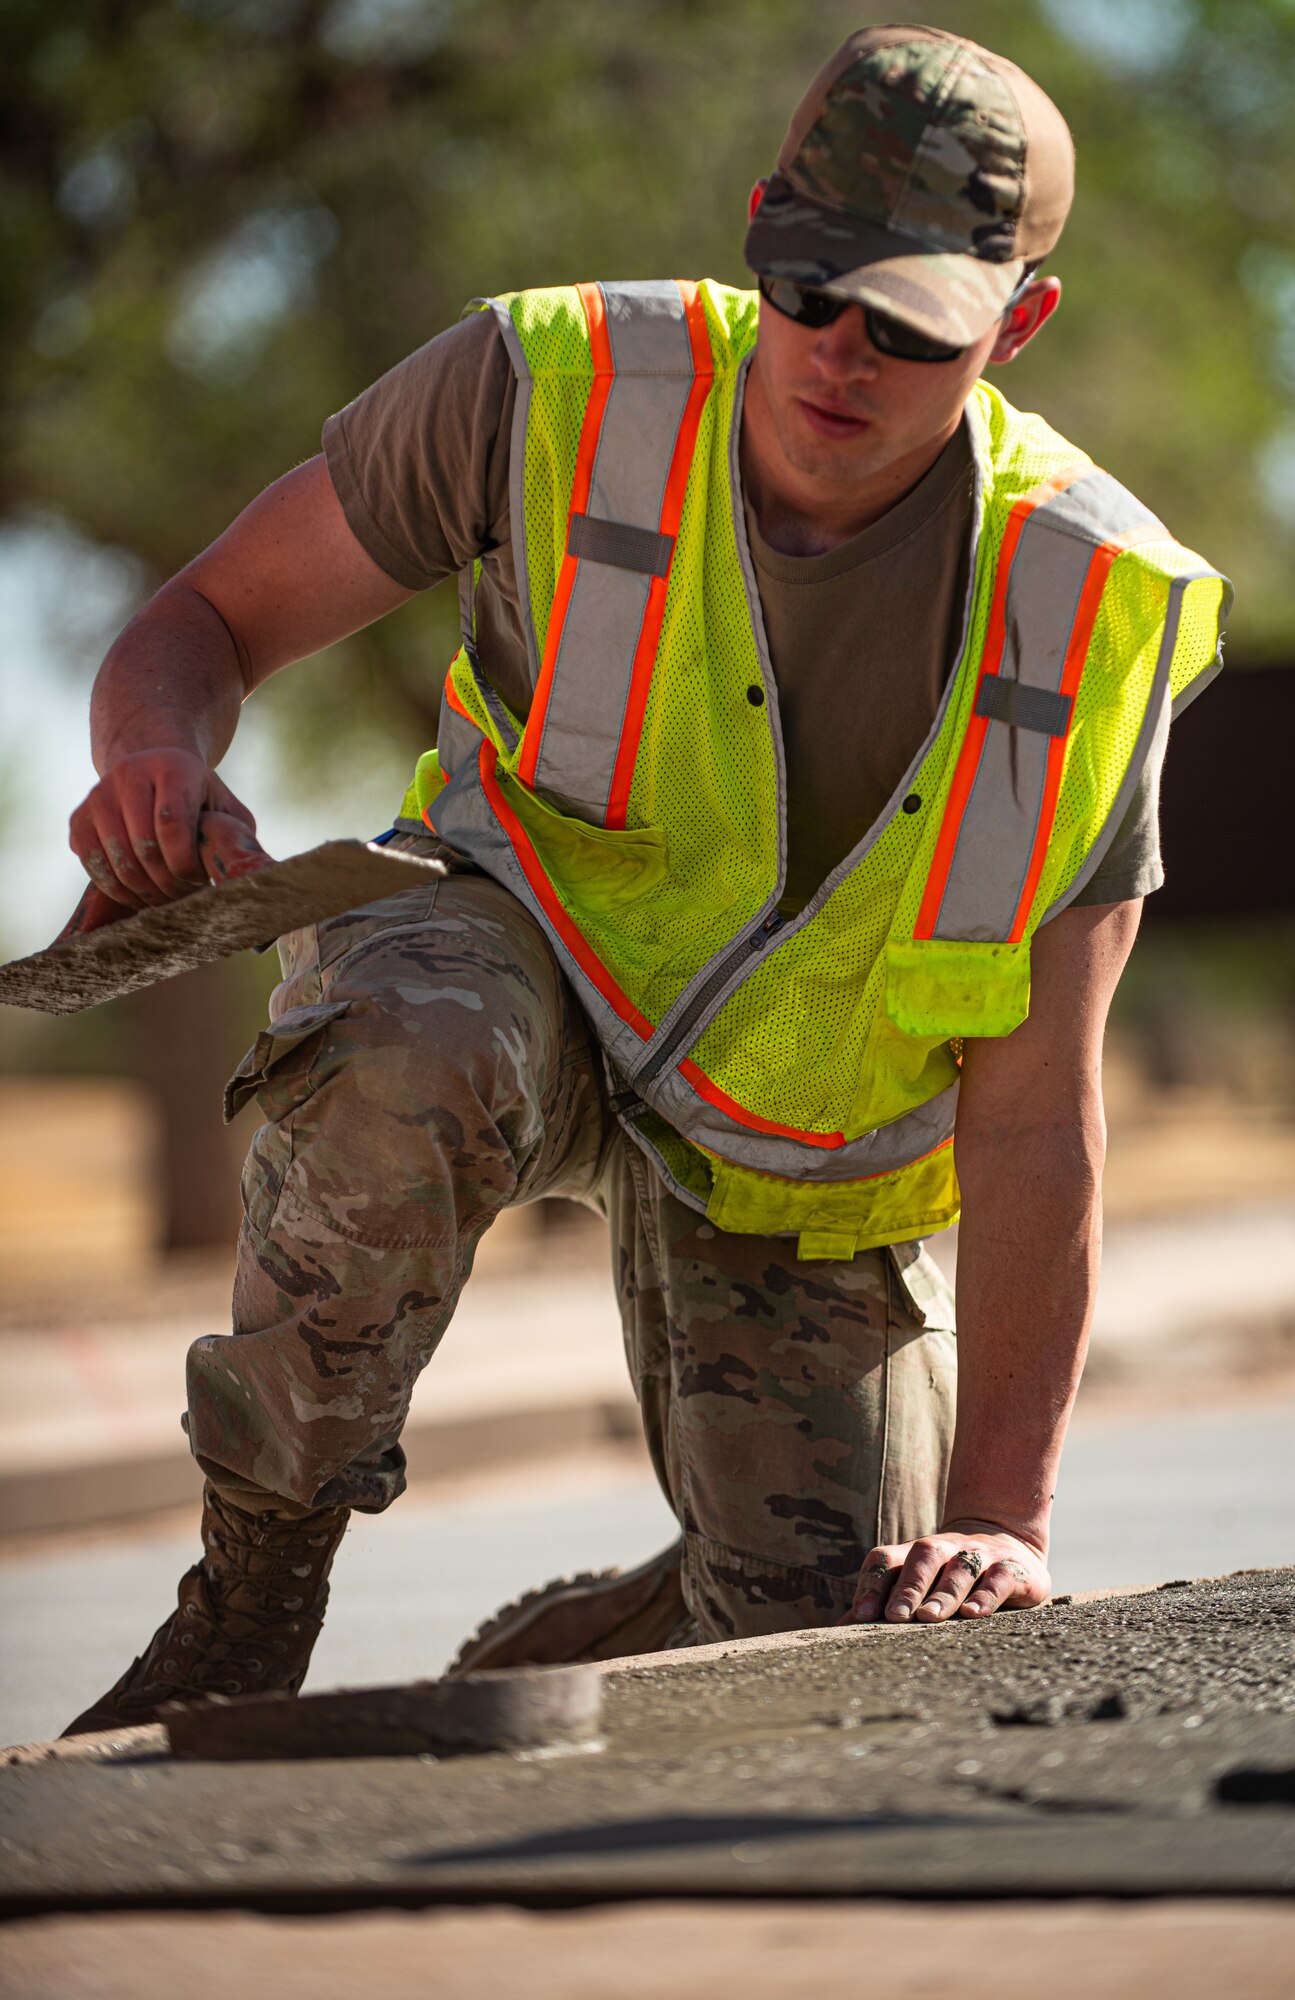 U.S Airman helps to reduce cracks by forming indentions in the concrete.